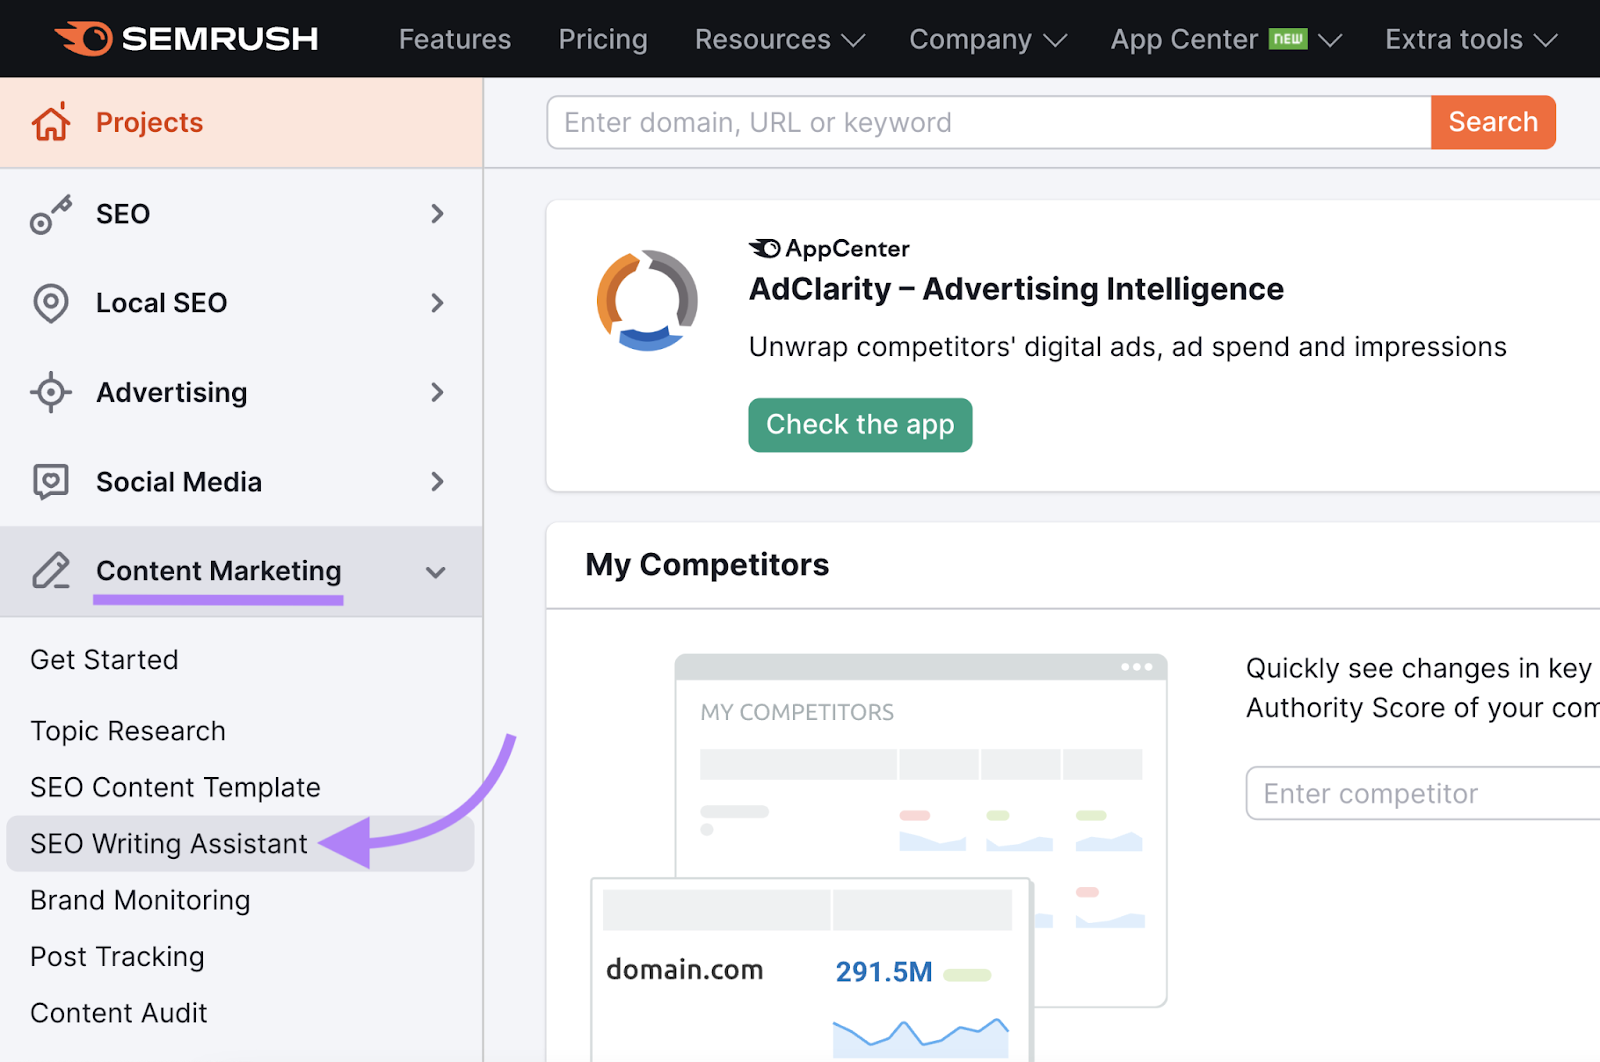 navigate to “Semrush Writing Assistant” in the left-side menu